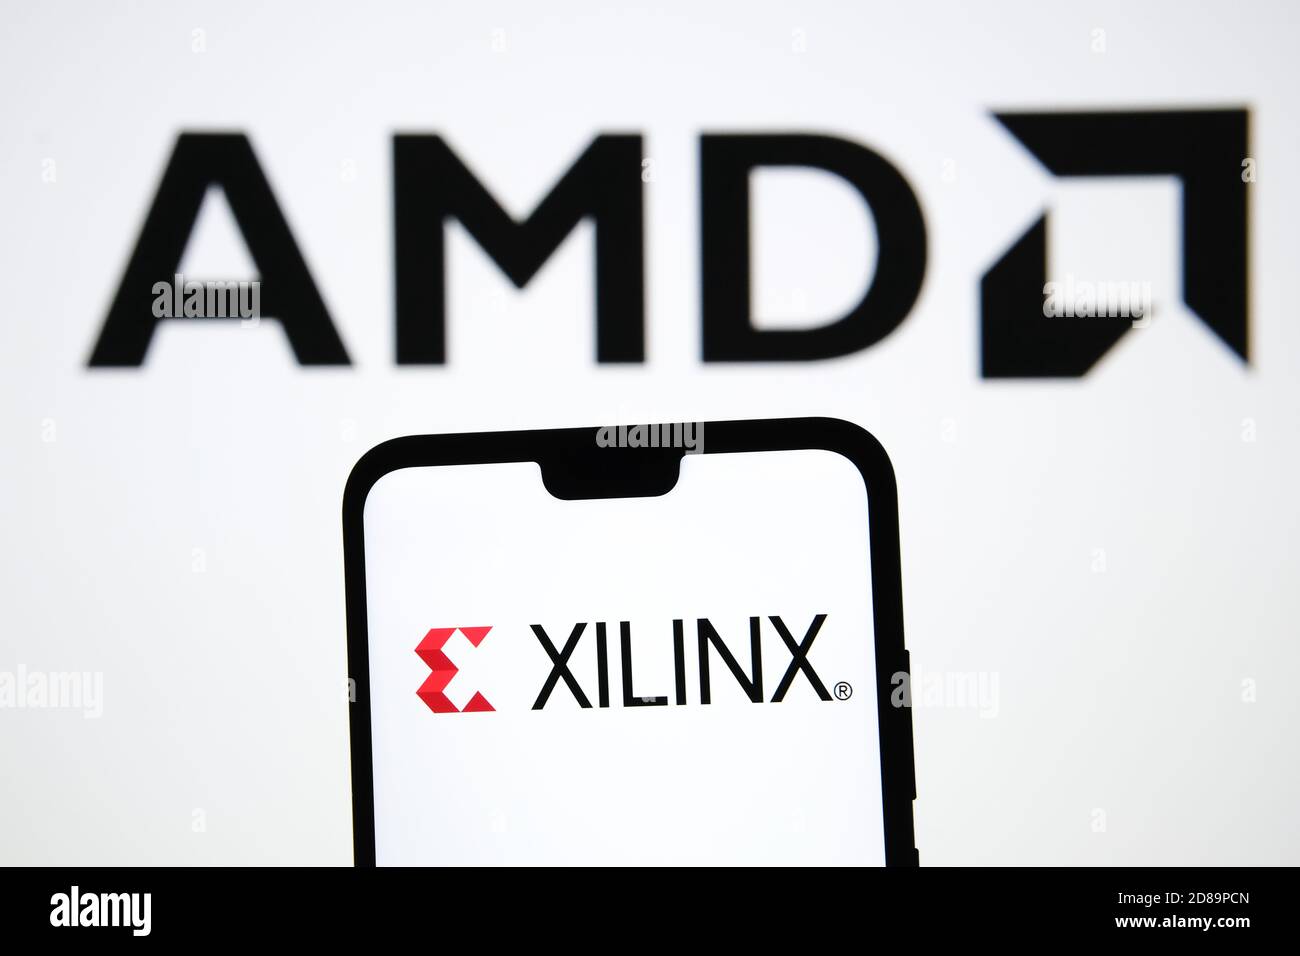 AMD to Acquire Xilinx, Concept. XILINX logo seen on the silhouette of smartphone in a hand and blurred AMD blurred logo on the background. Stock Photo